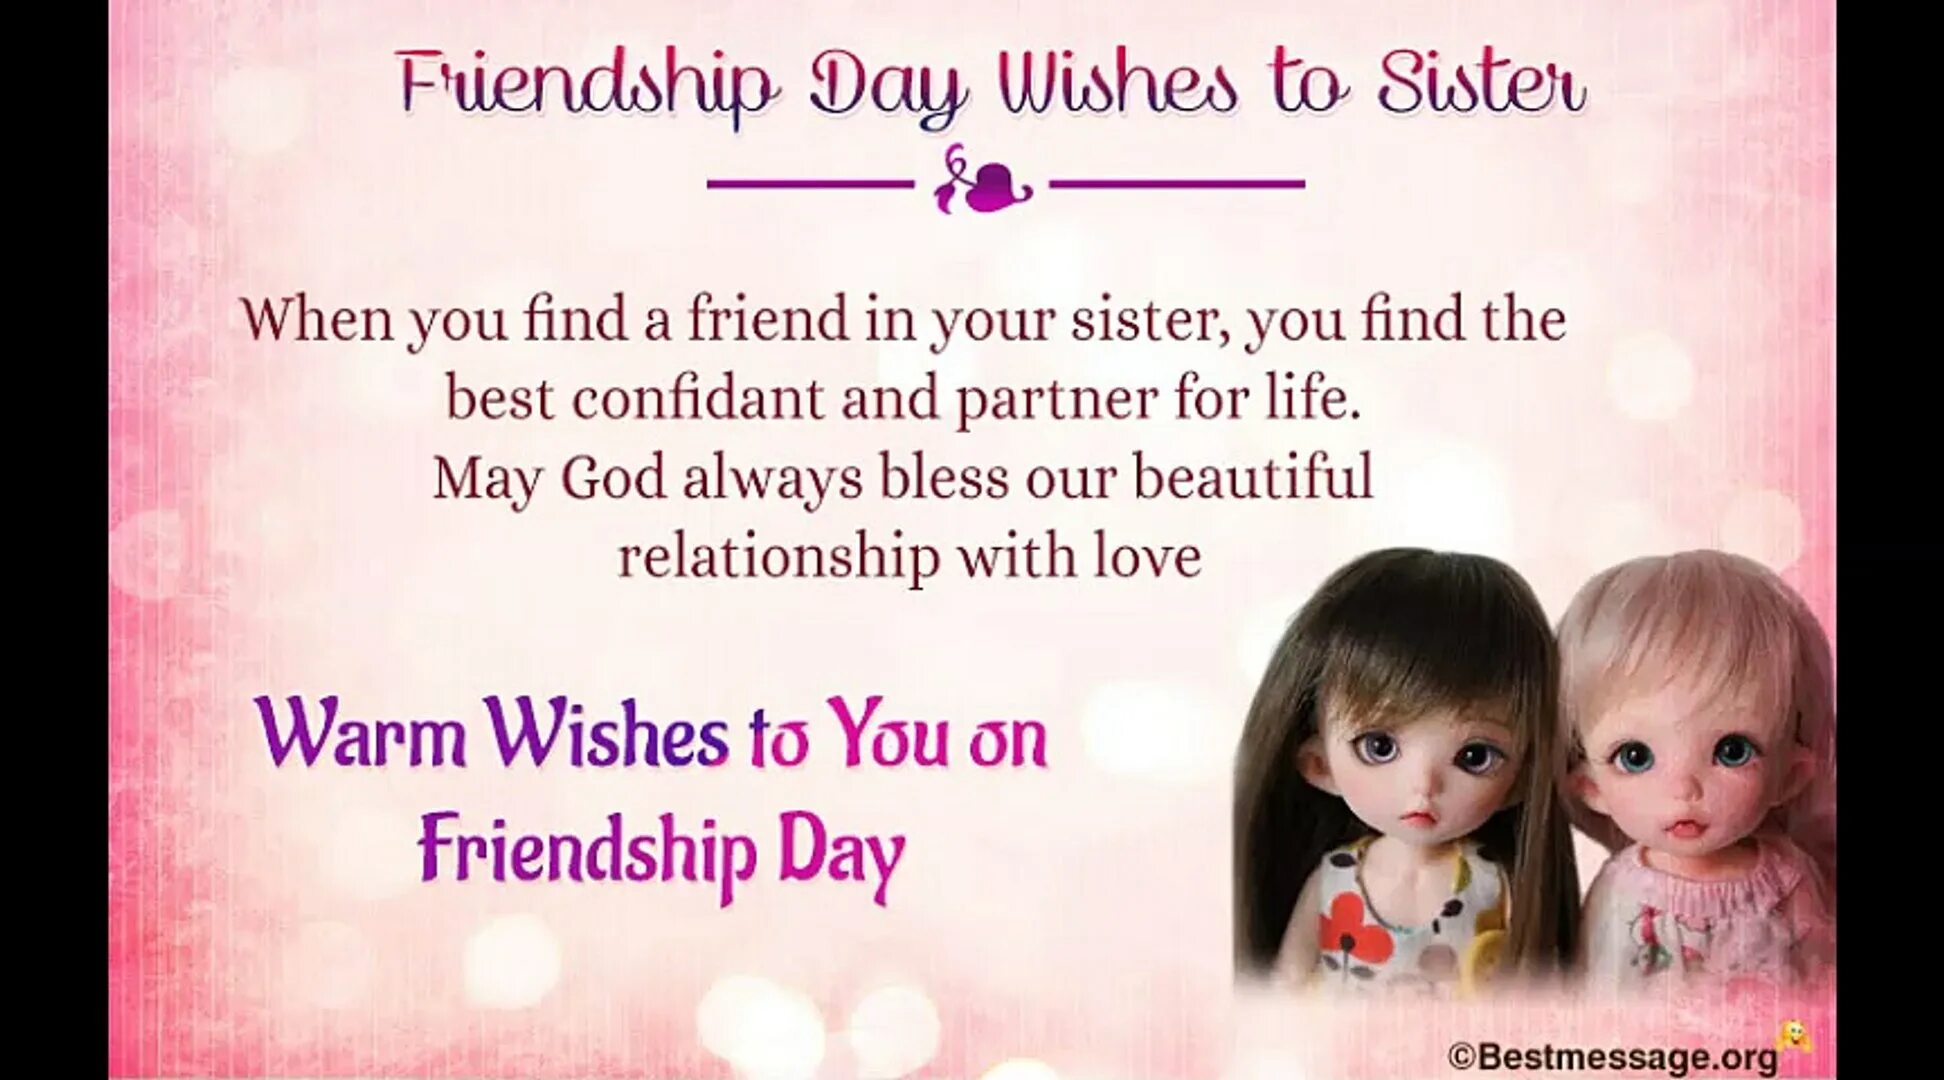 Sister Wish. My friend is Day. Friendship message quotes. Greetings about Friendship.